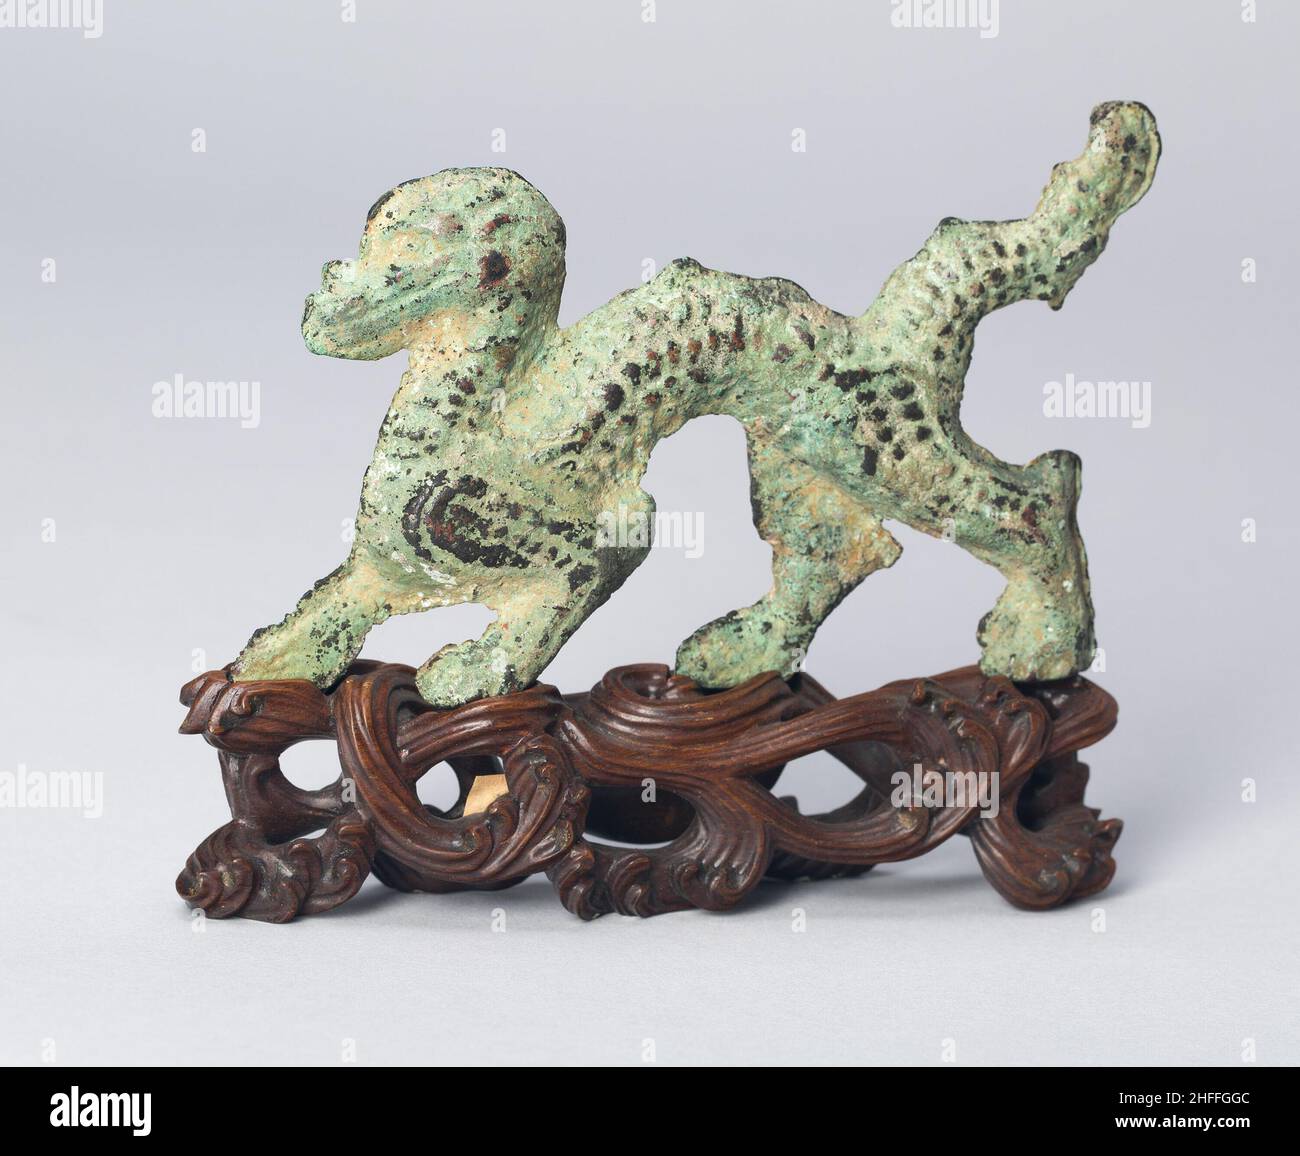 Dragon, Han dynasty (206 B.C.-A.D. 220) or later. Stock Photo